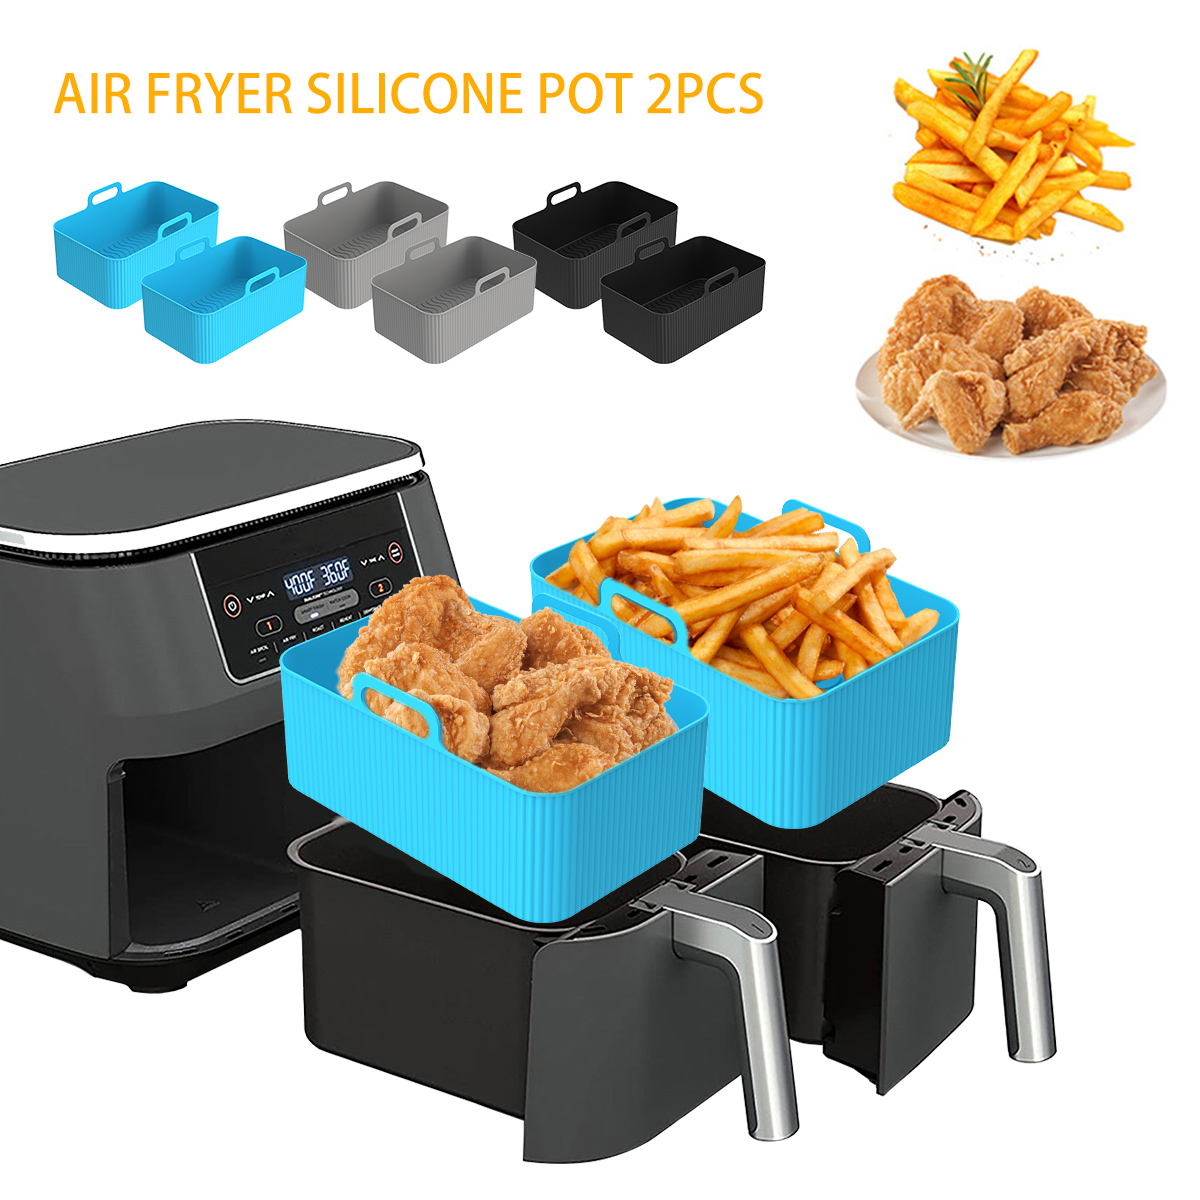 2 Pcs Silicone Air Fryer Liners for Ninja Foodi DZ201 DZ401 6-in-1